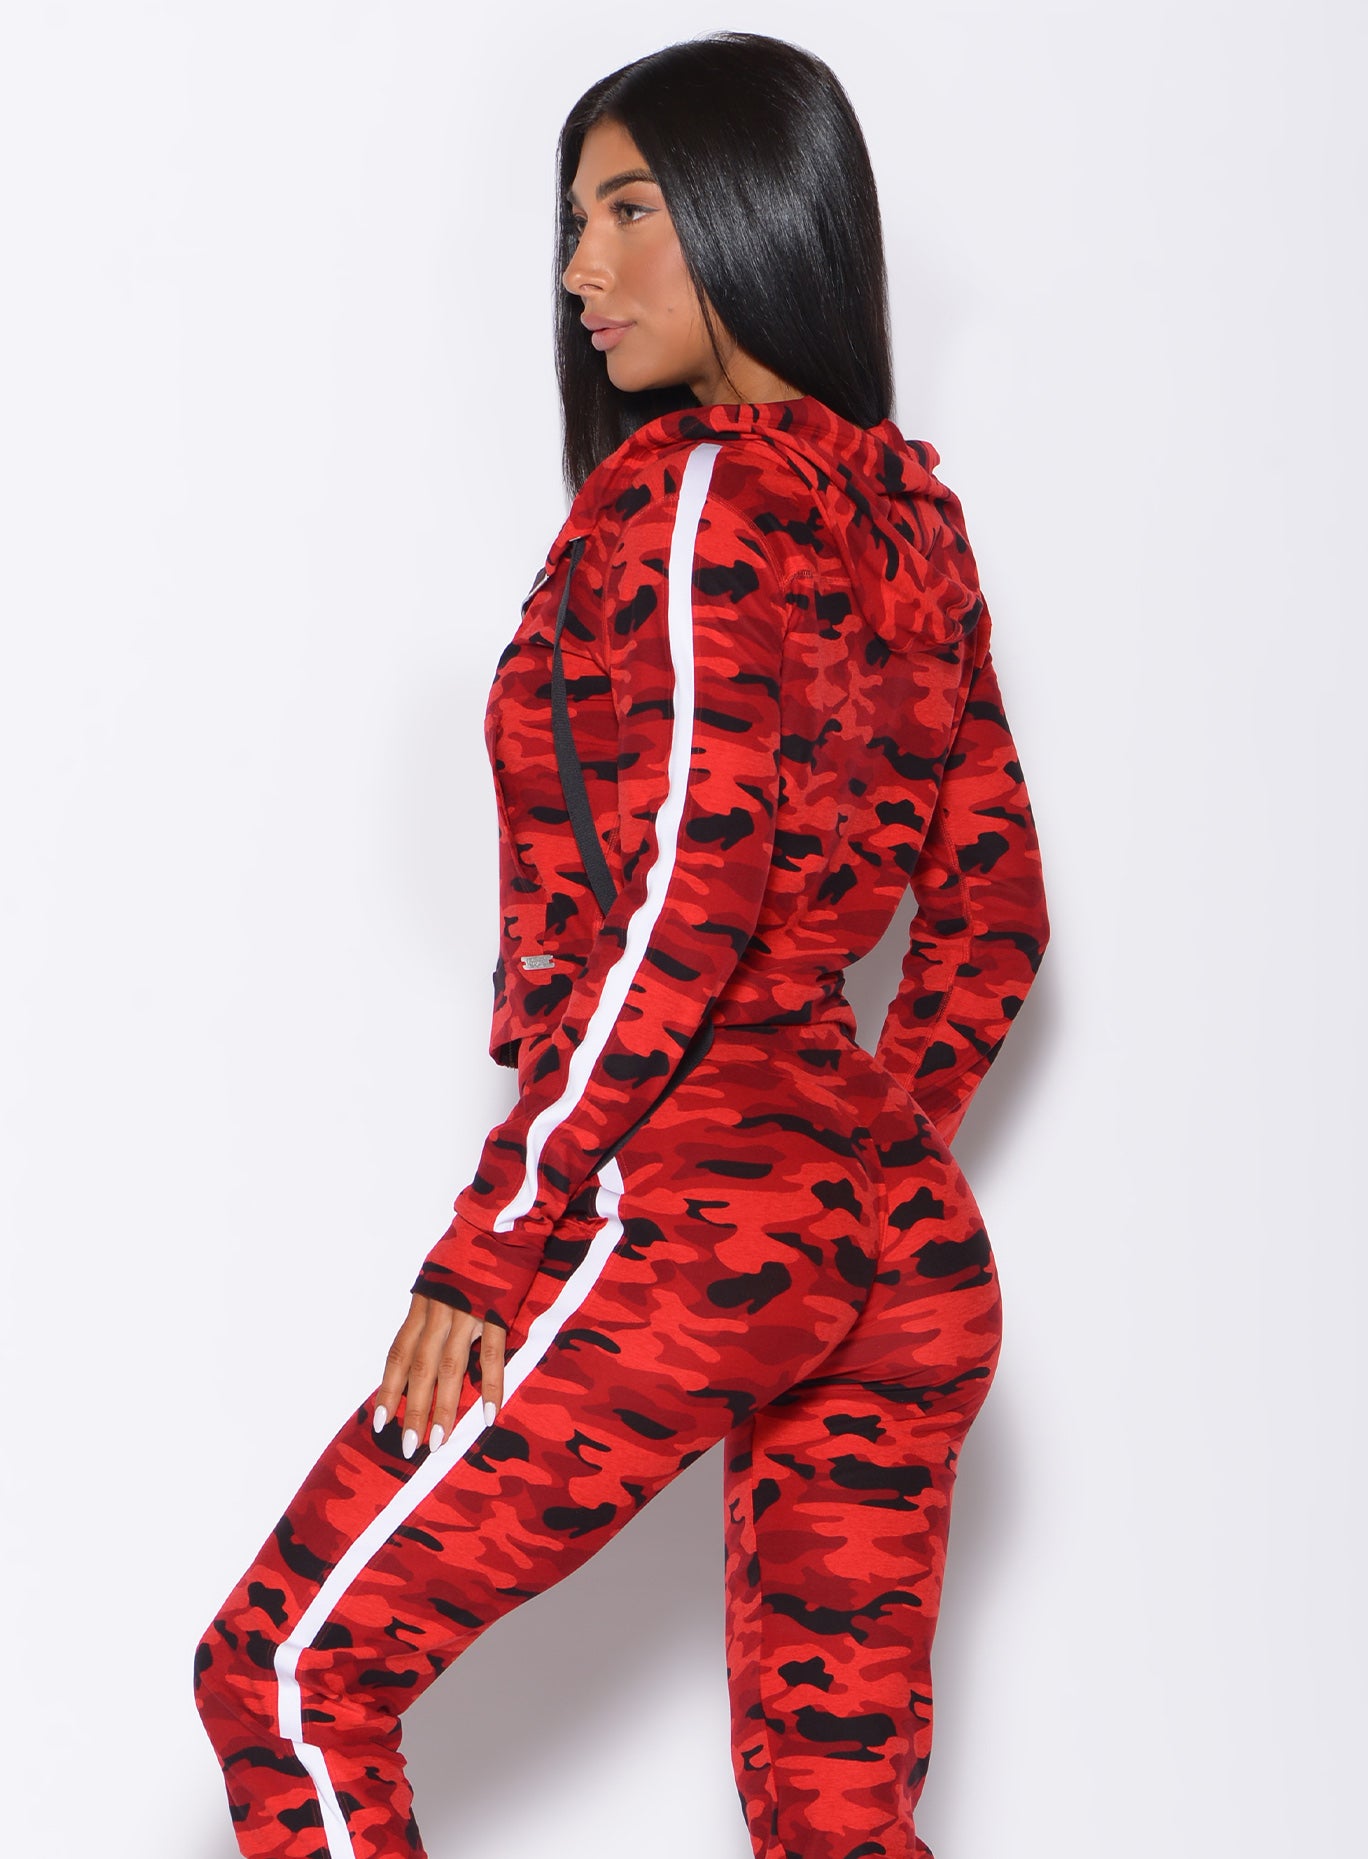 Left side profile view of a model wearing our dream jacket in Red Rebel Camo color and a matching joggers